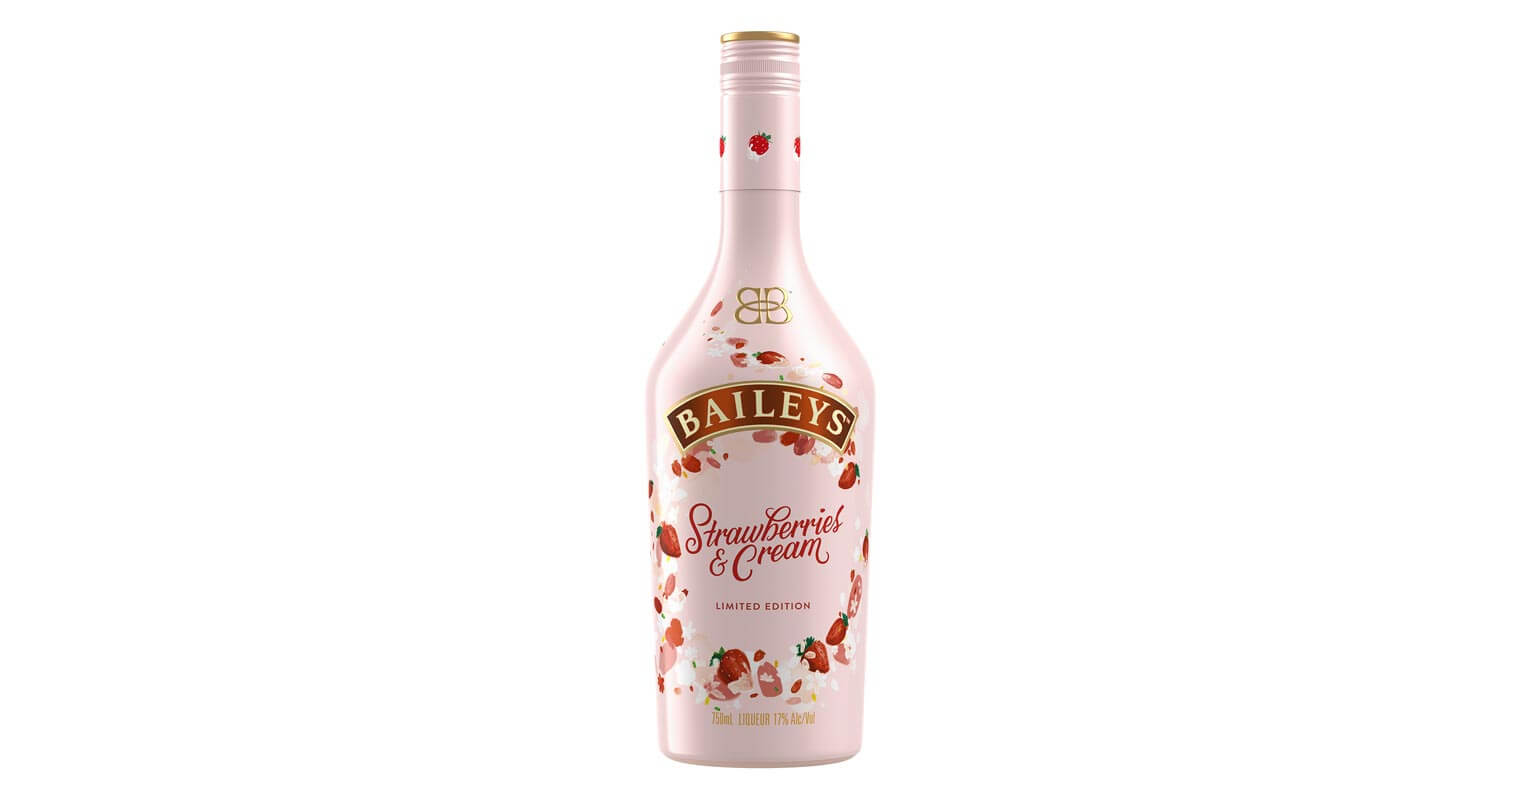 Baileys Strawberries & Cream, bottle on white, featured image